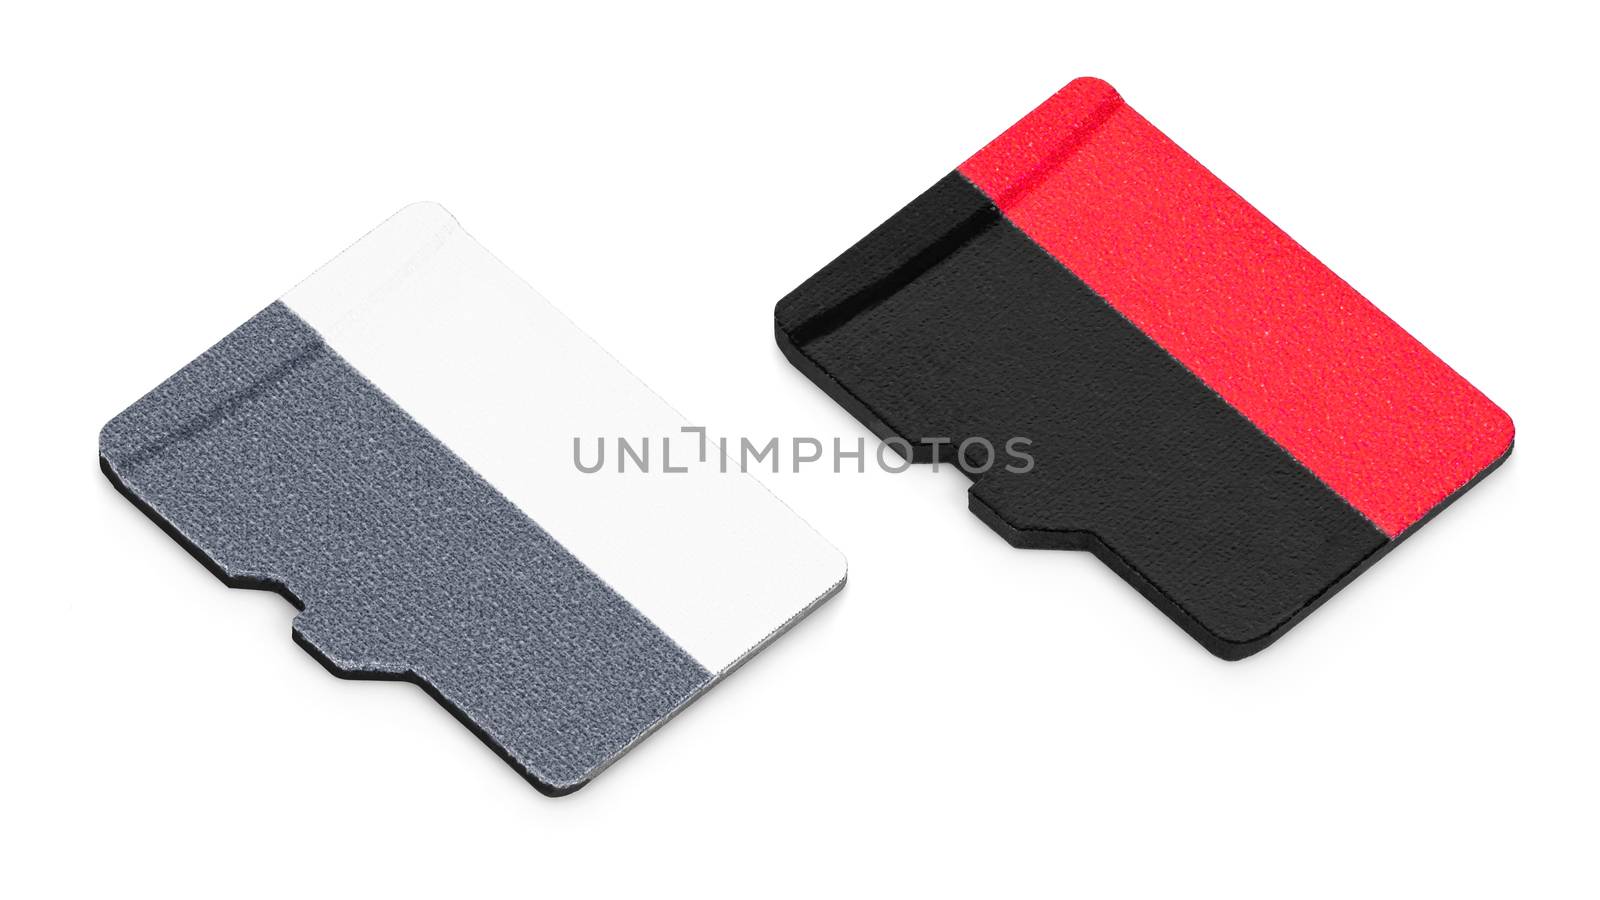 Two blank micro SD memory cards on white background by mkos83